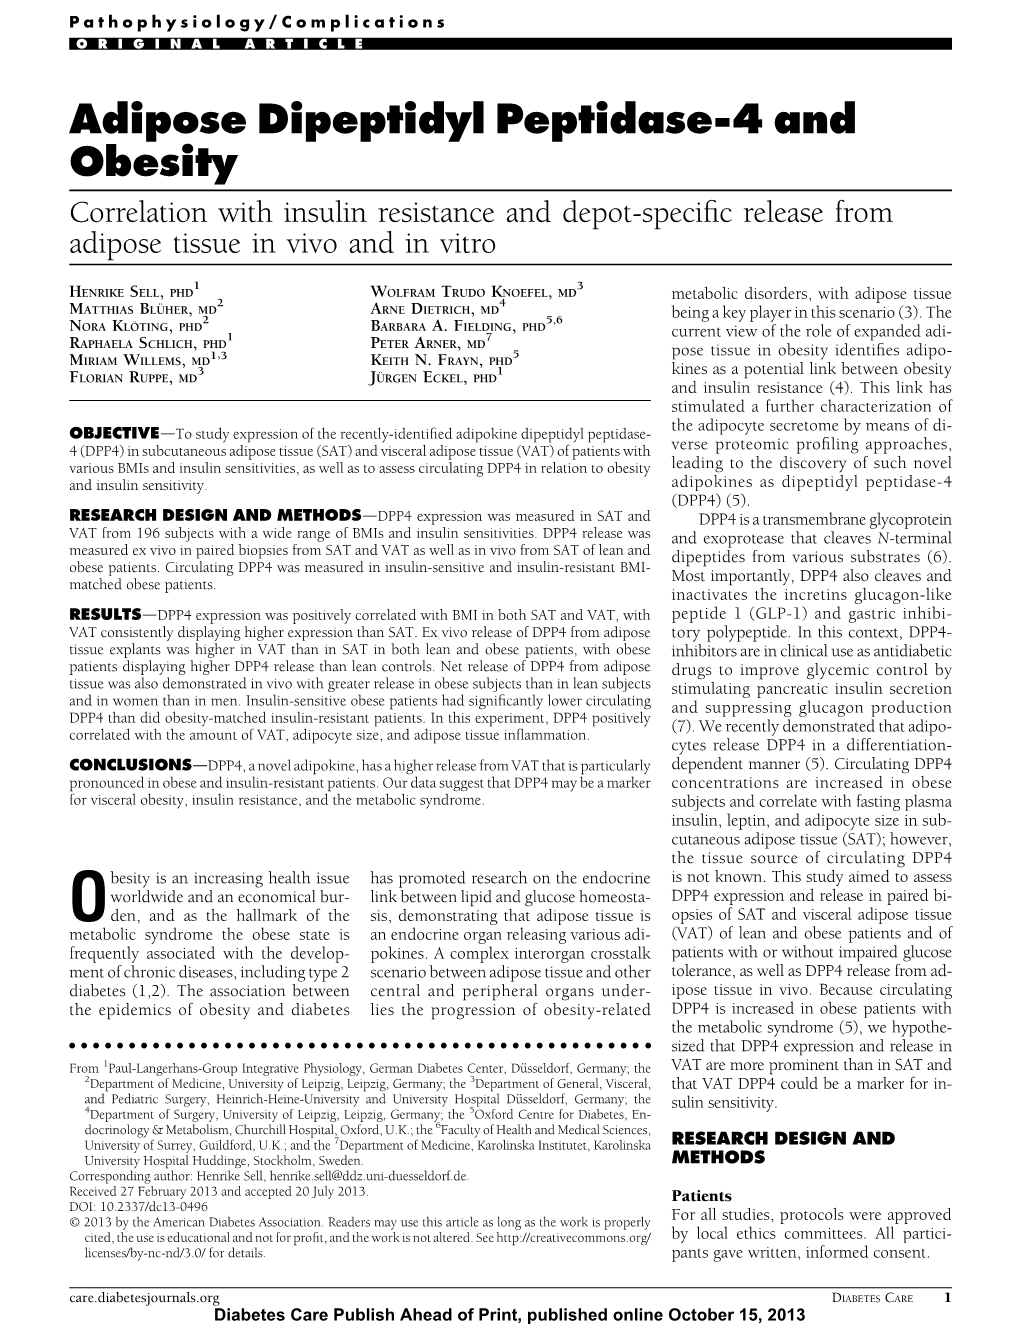 Adipose Dipeptidyl Peptidase-4 and Obesity Correlation with Insulin Resistance and Depot-Speciﬁc Release from Adipose Tissue in Vivo and in Vitro